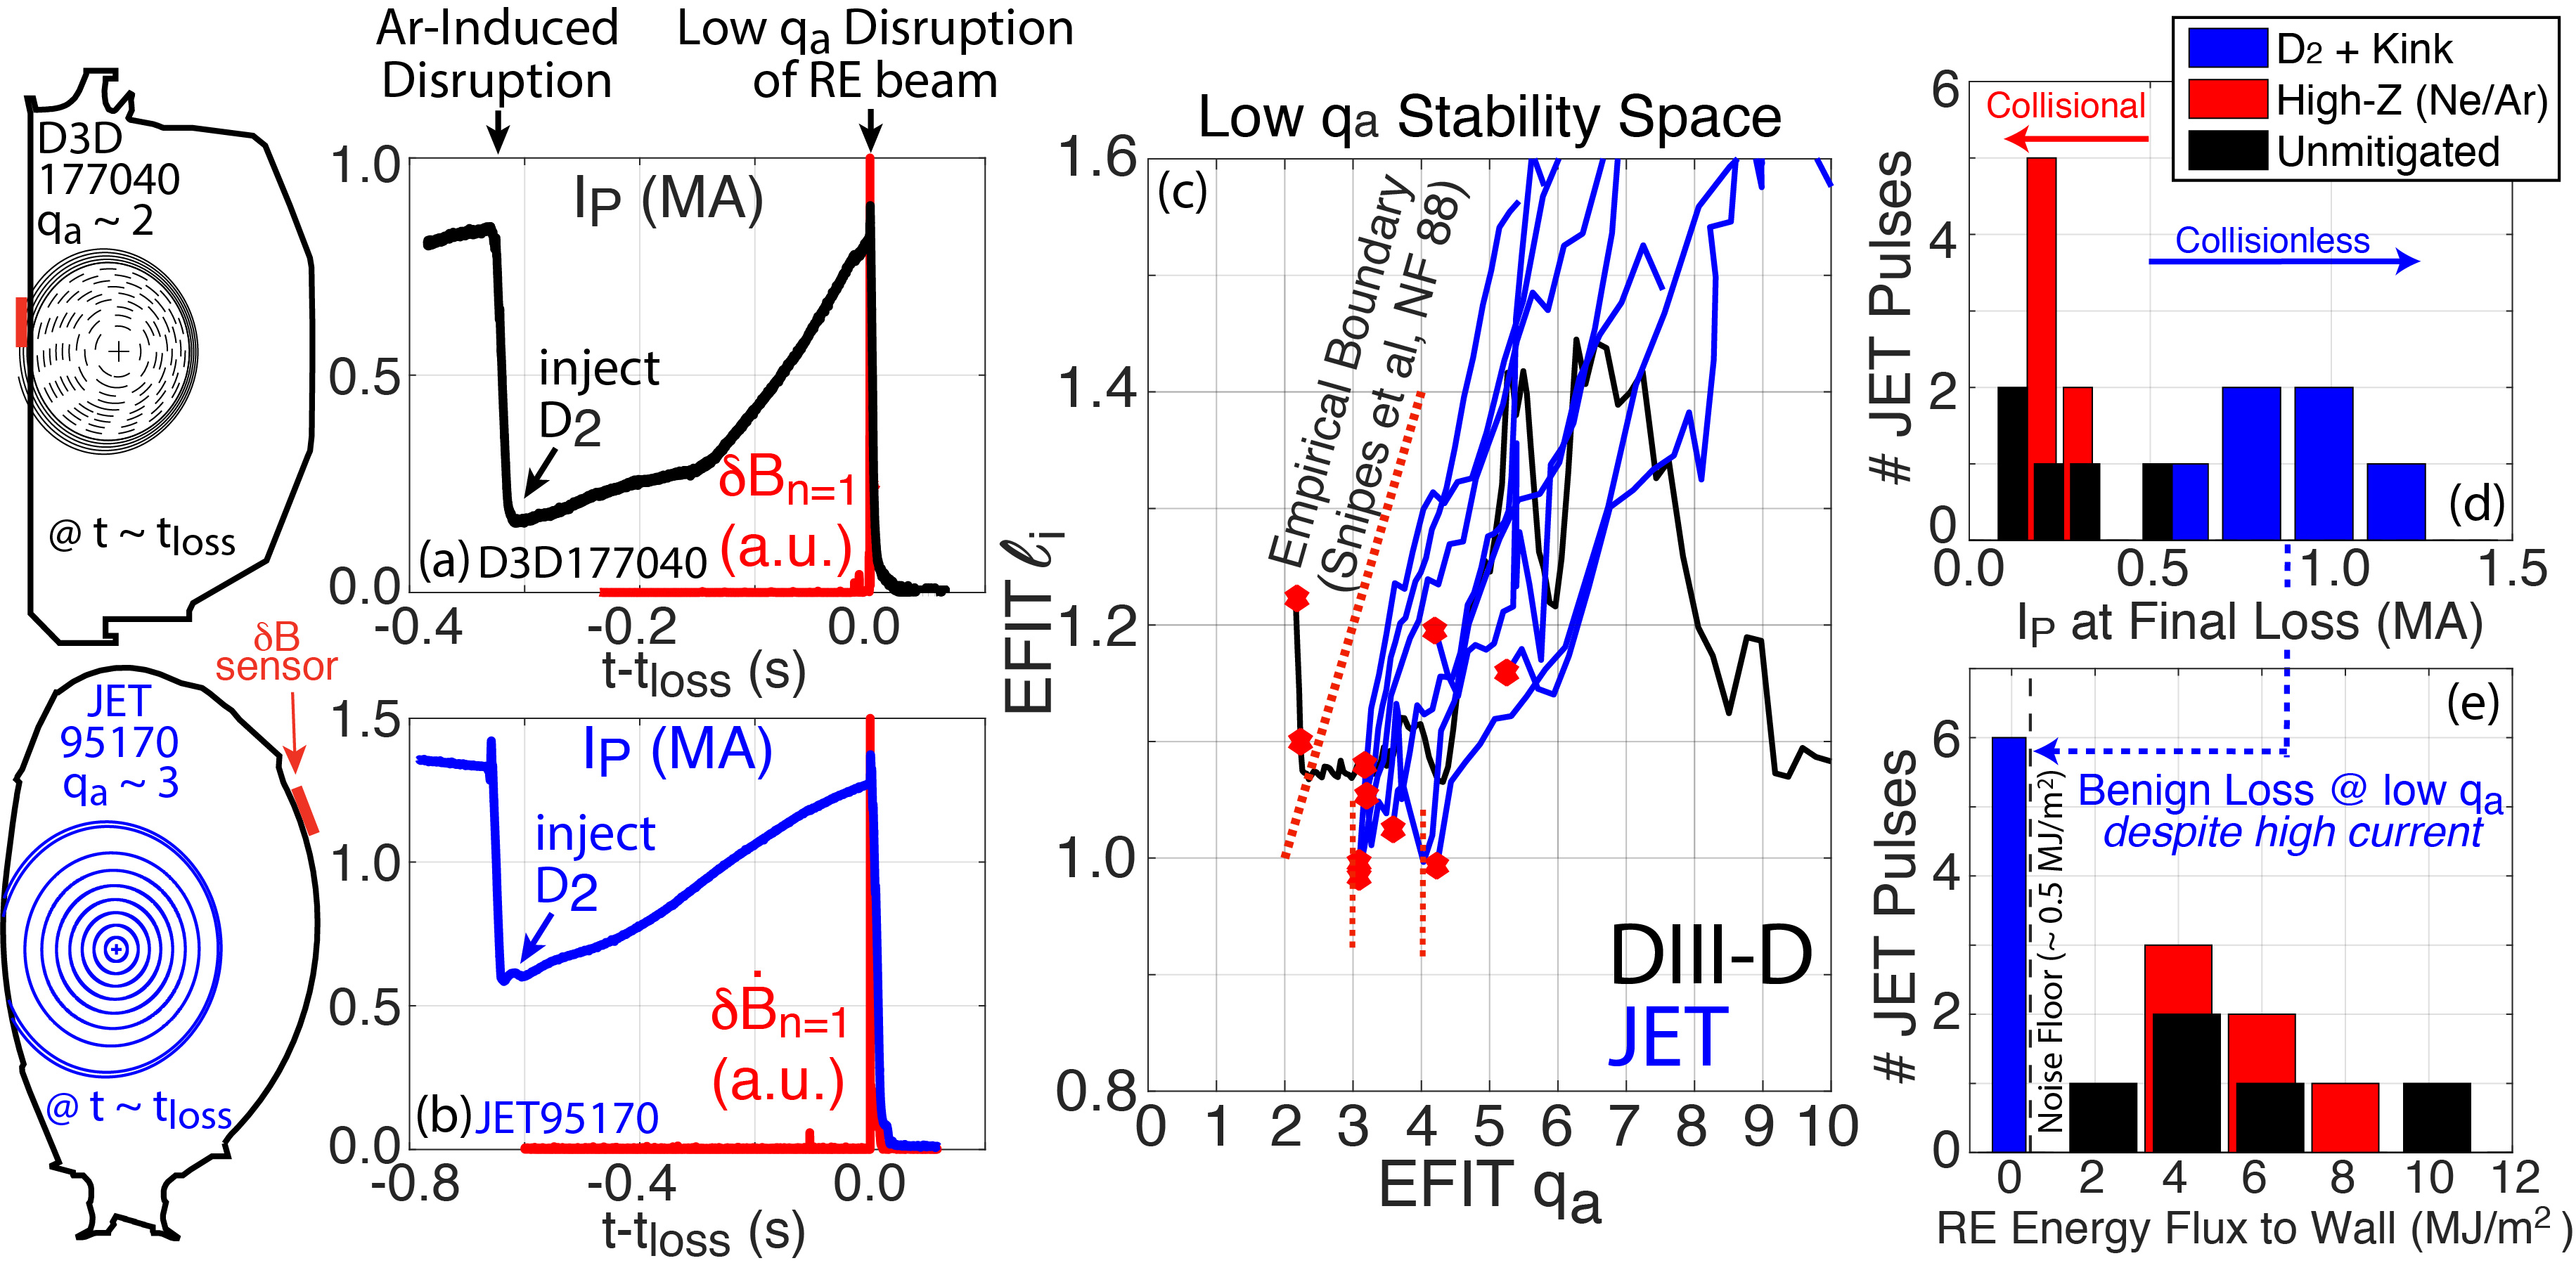  (a-b) Access to high Ip RE beams with D2 injection yields low qa conditions and fast current-driven kink onset at the final loss (t=t_loss), (c) well matching the conventional stability boundary. While (d) the RE current at the final loss is much larger than high-Z collisionally dissipated beams, (e) the energy flux to the wall is below the noise floor.